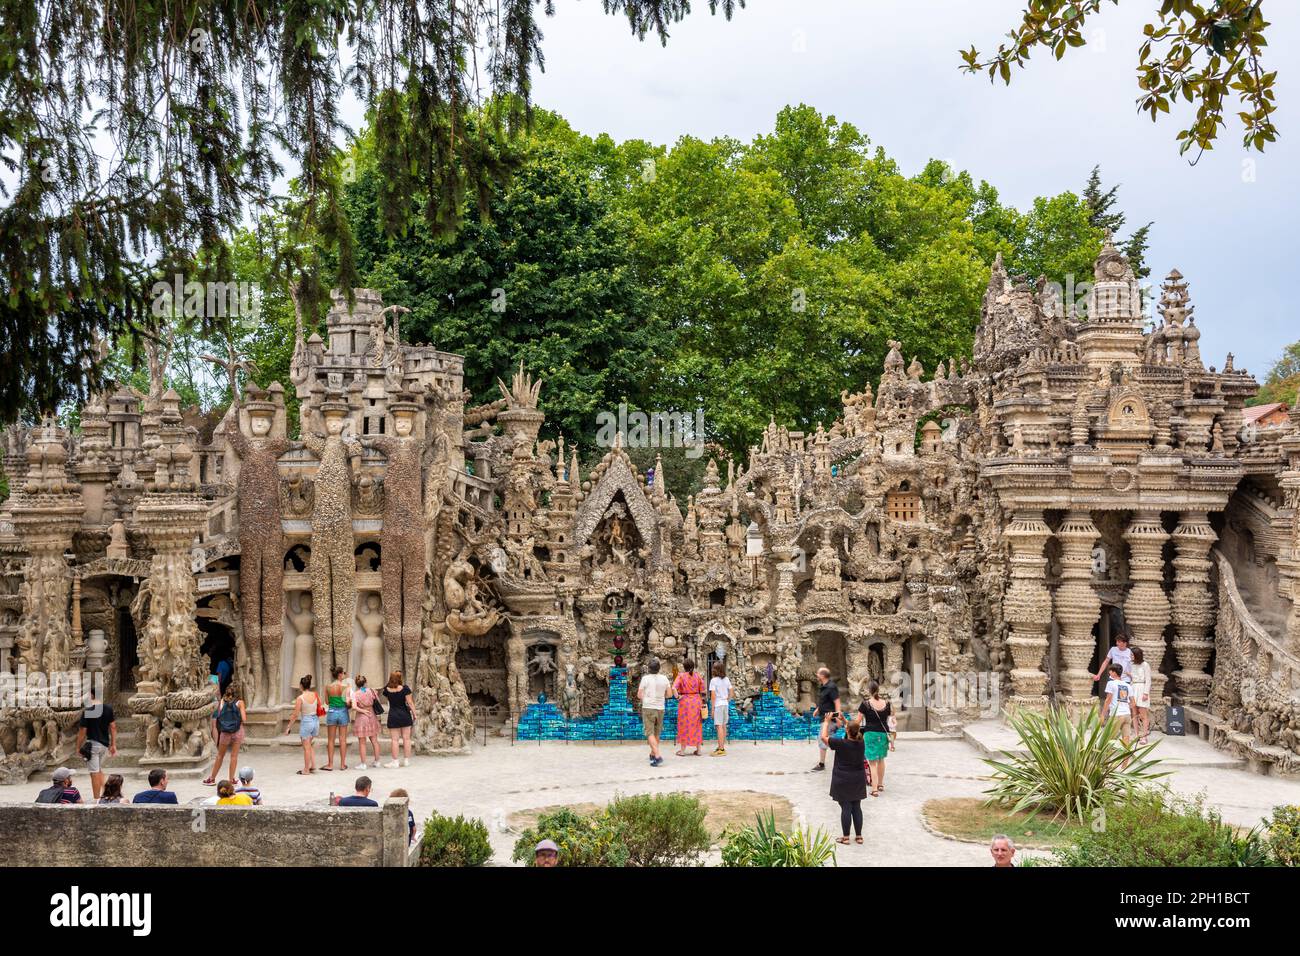 Hauterives, France - August 05, 2022 : The Postman Cheval s Ideal Palace is a unique architectural wonder located in Hauterives, built by a postman na Stock Photo